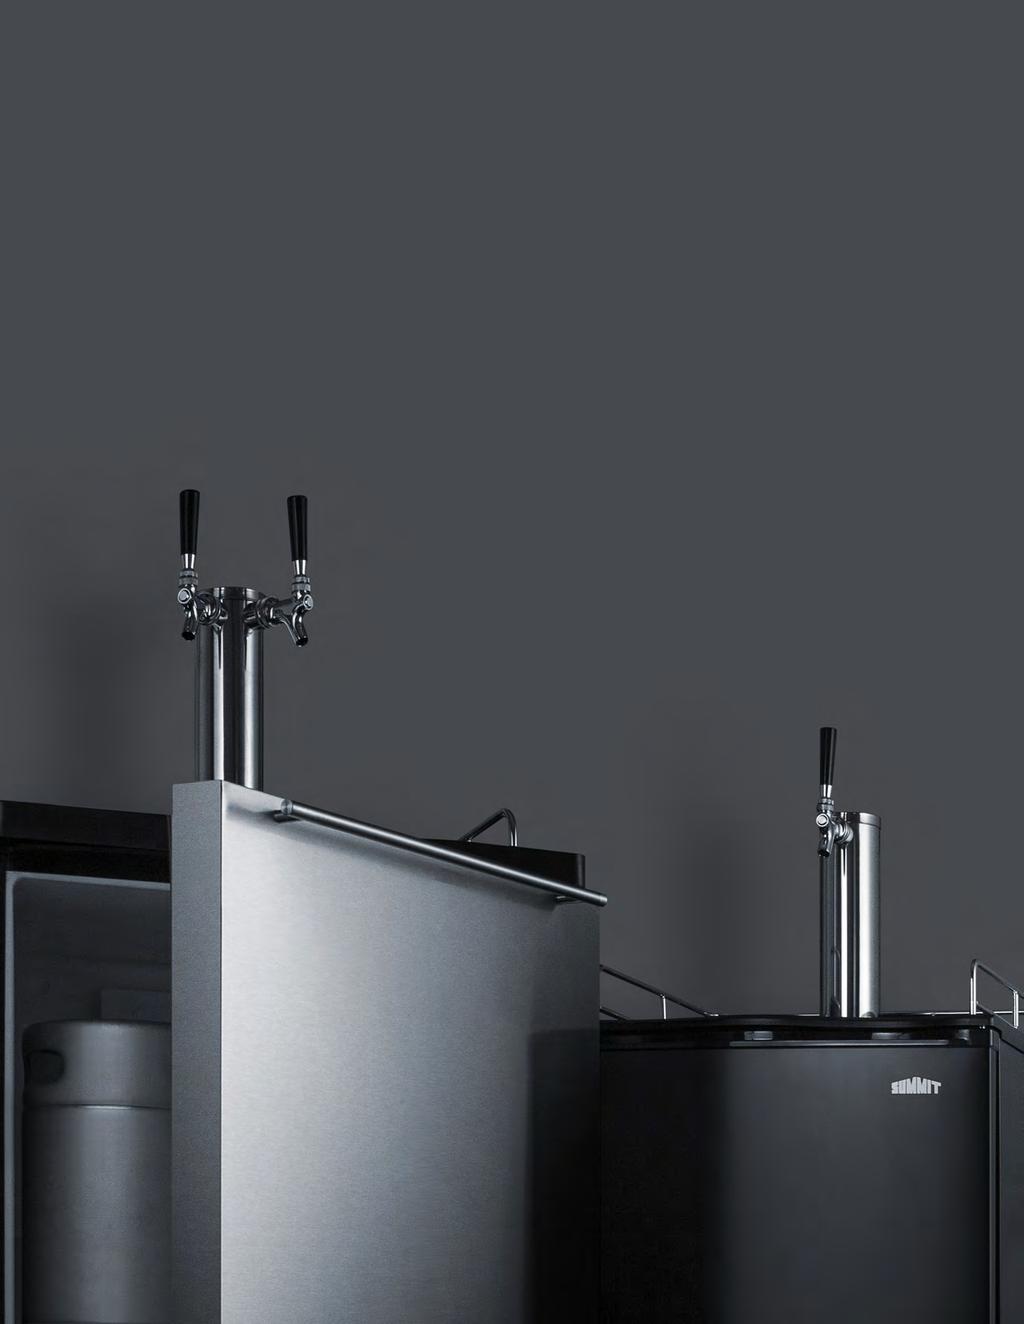 Beer, Wine, & Cold Brew Coffee Dispensers COMMERCIAL PRODUCT LINE FEATURES* Store & serve from a full-sized standard keg or sixtels Outdoor units available with weatherproof construction Digital